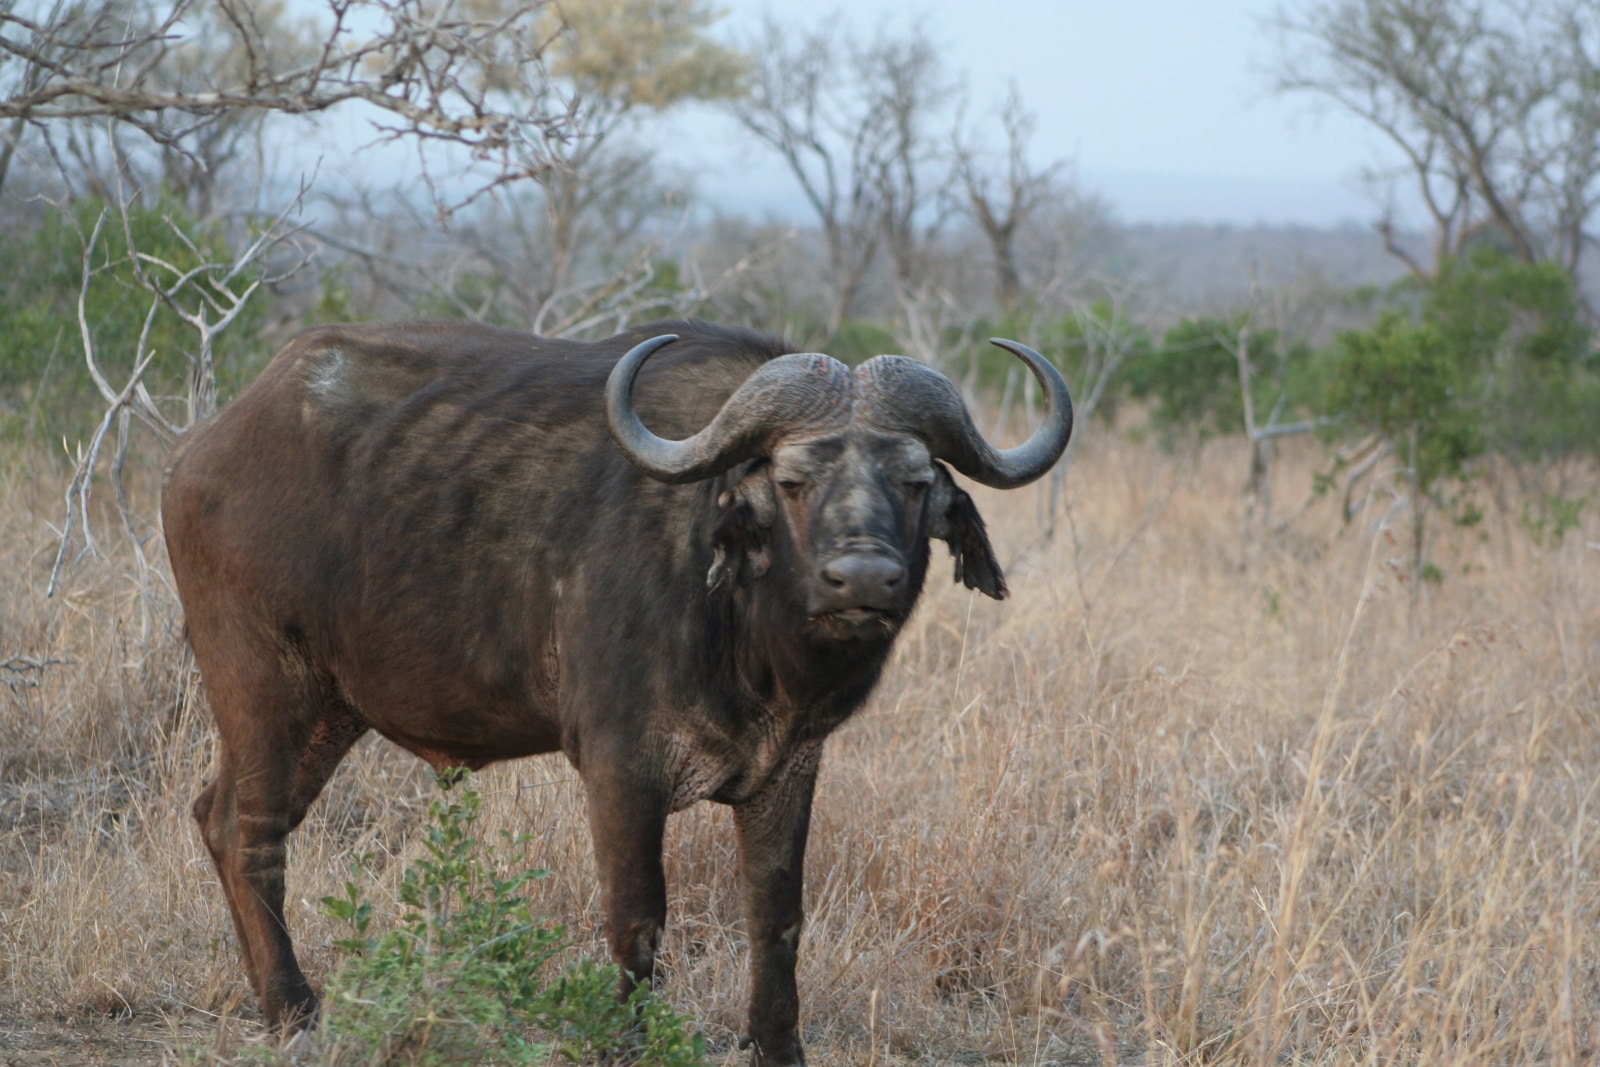 A buffalo standing in the grass